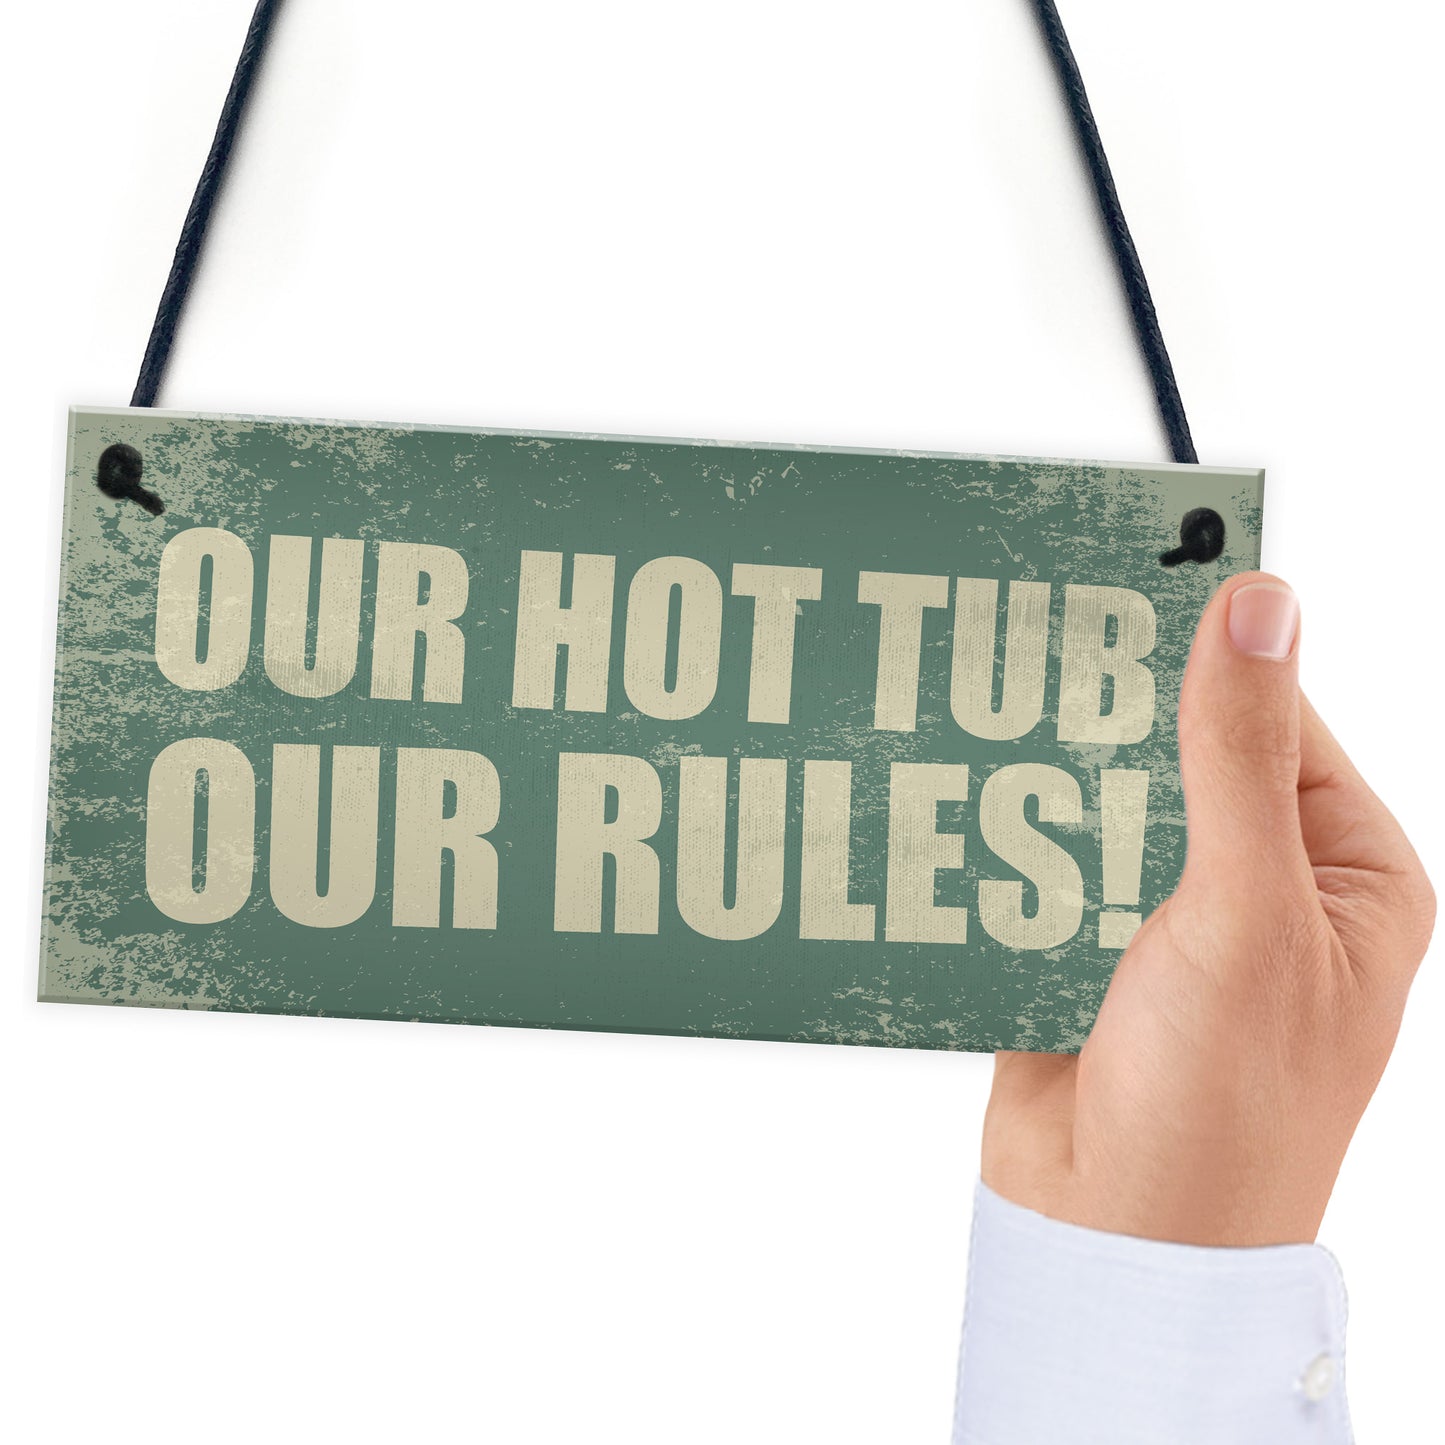 Funny Hot Tub Sign 3 Pack Of Hanging Plaques Hot Tub Accessories